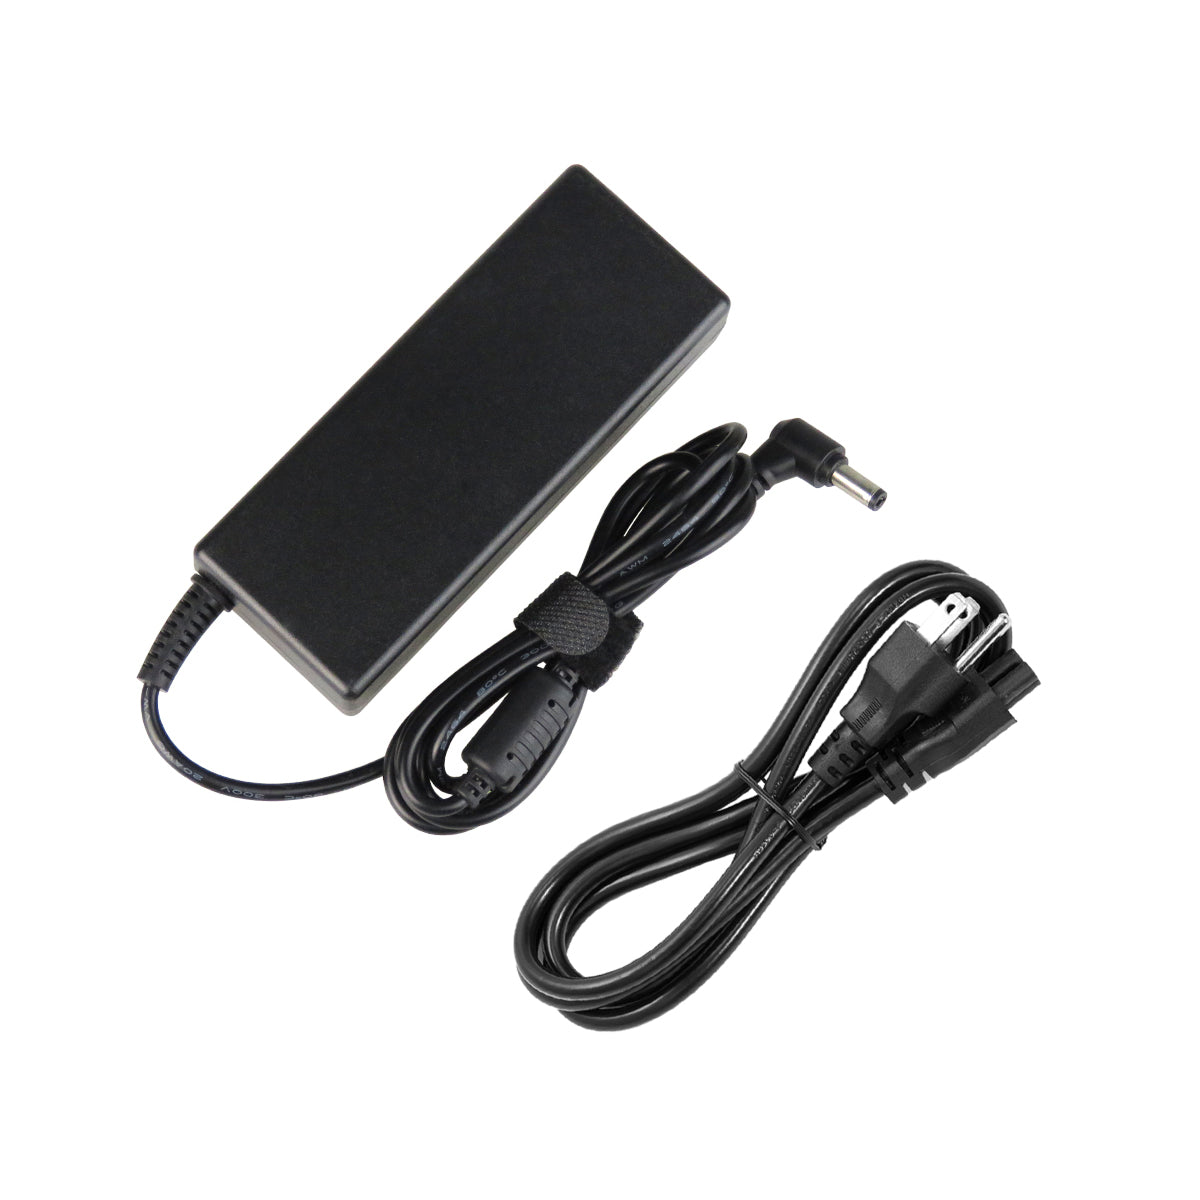 AC Adapter Charger for ASUS K43SV Notebook.